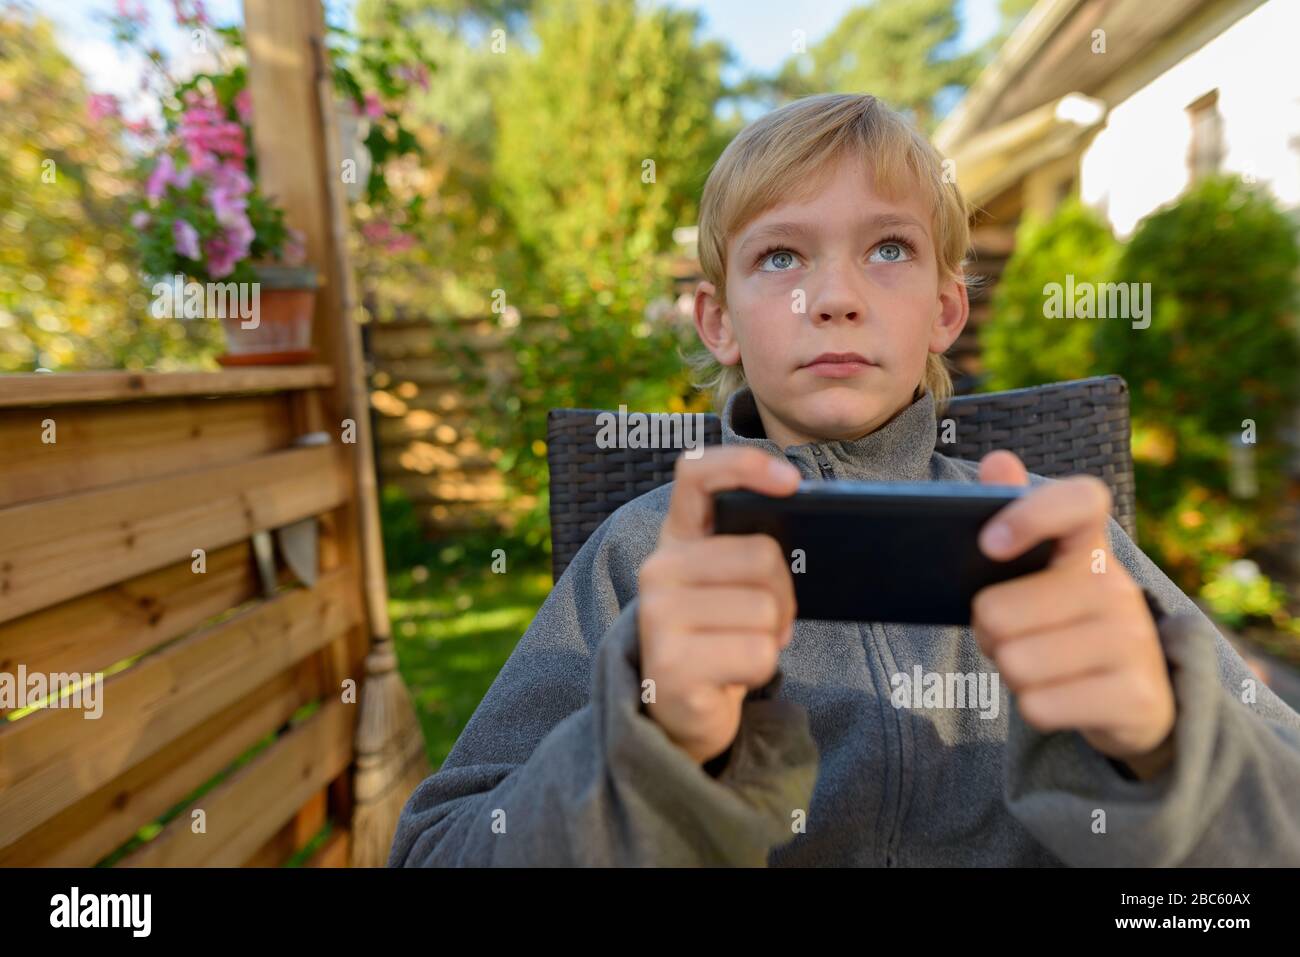 Young handsome boy thinking while using phone in the backyard Stock Photo